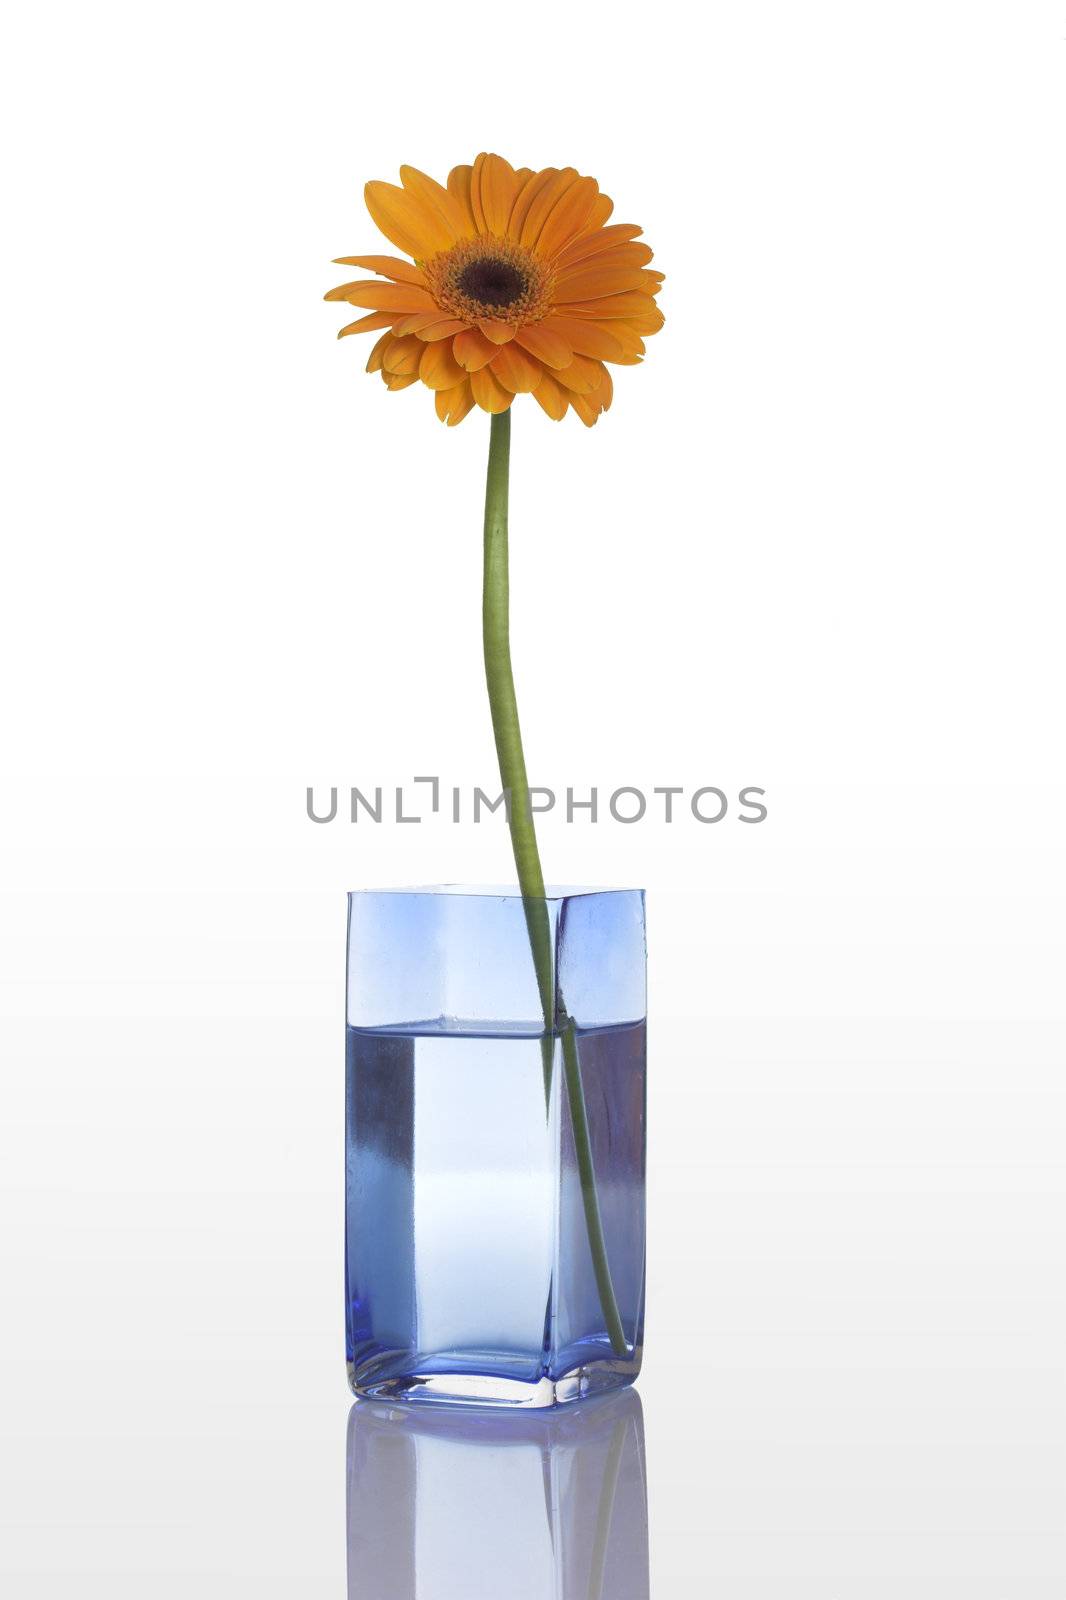 A blue vase with a orange gerbera flower isolated on white background 